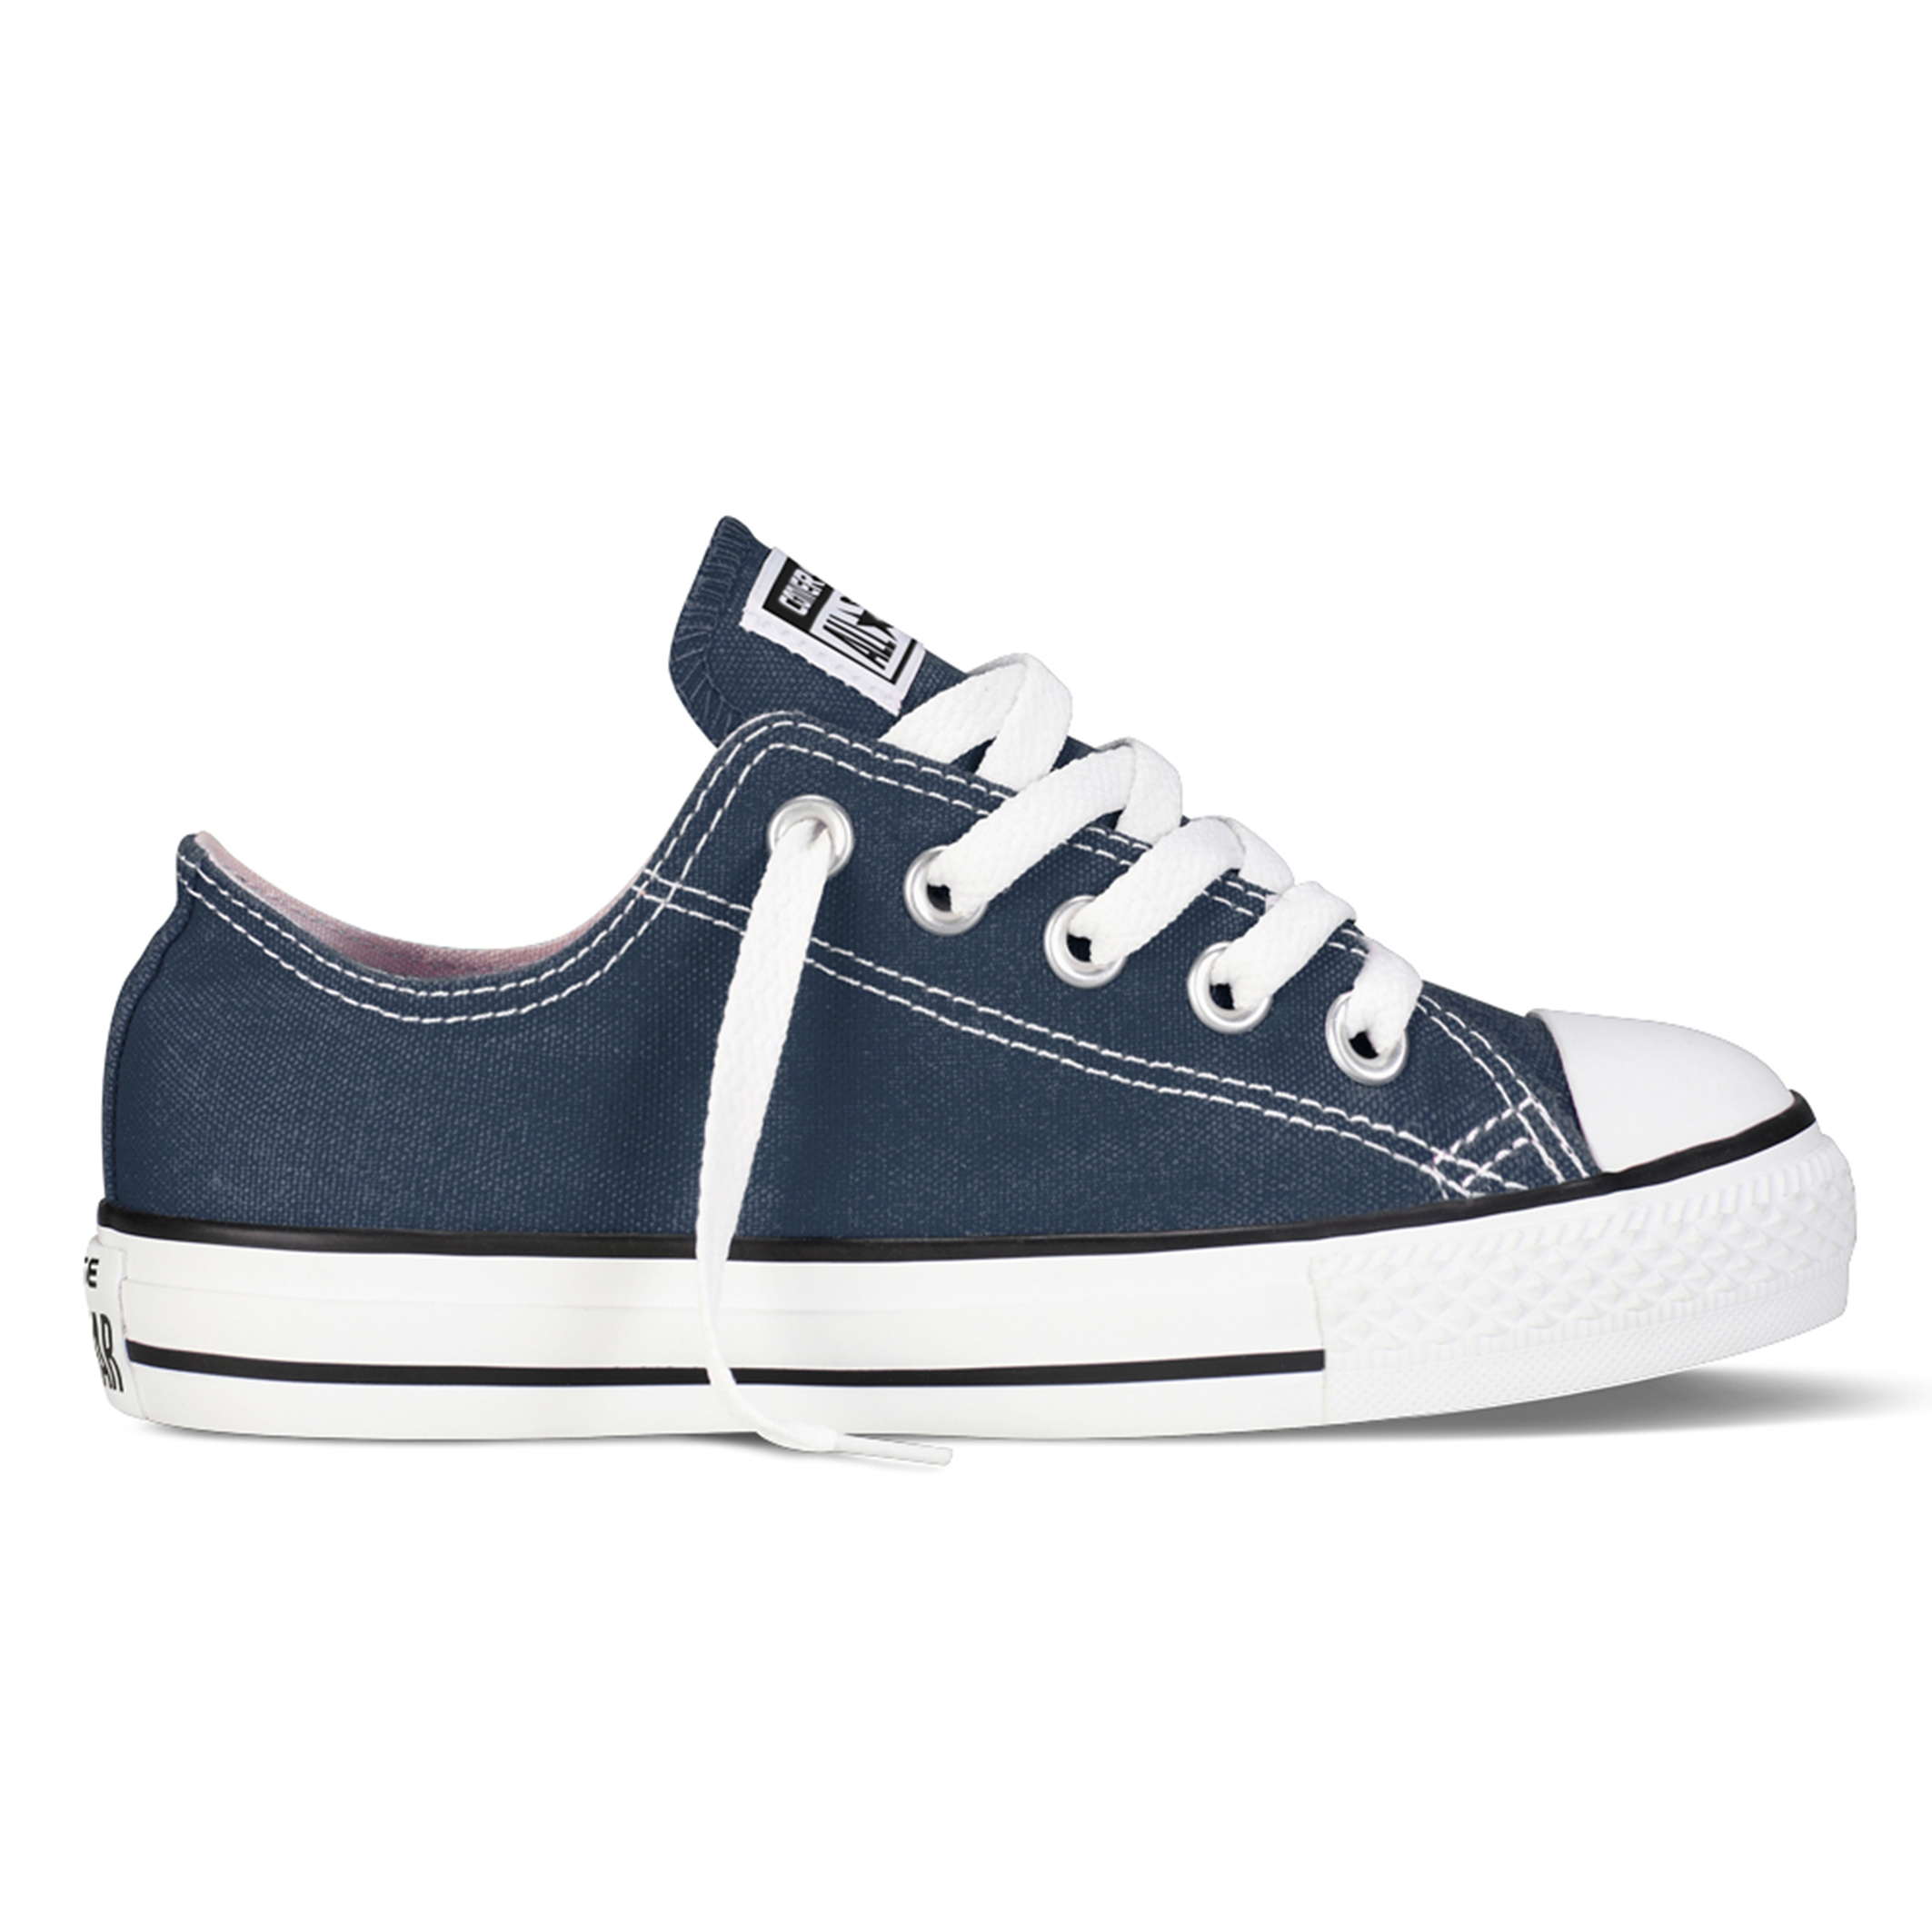 Kids chuck taylor all star core canvas 